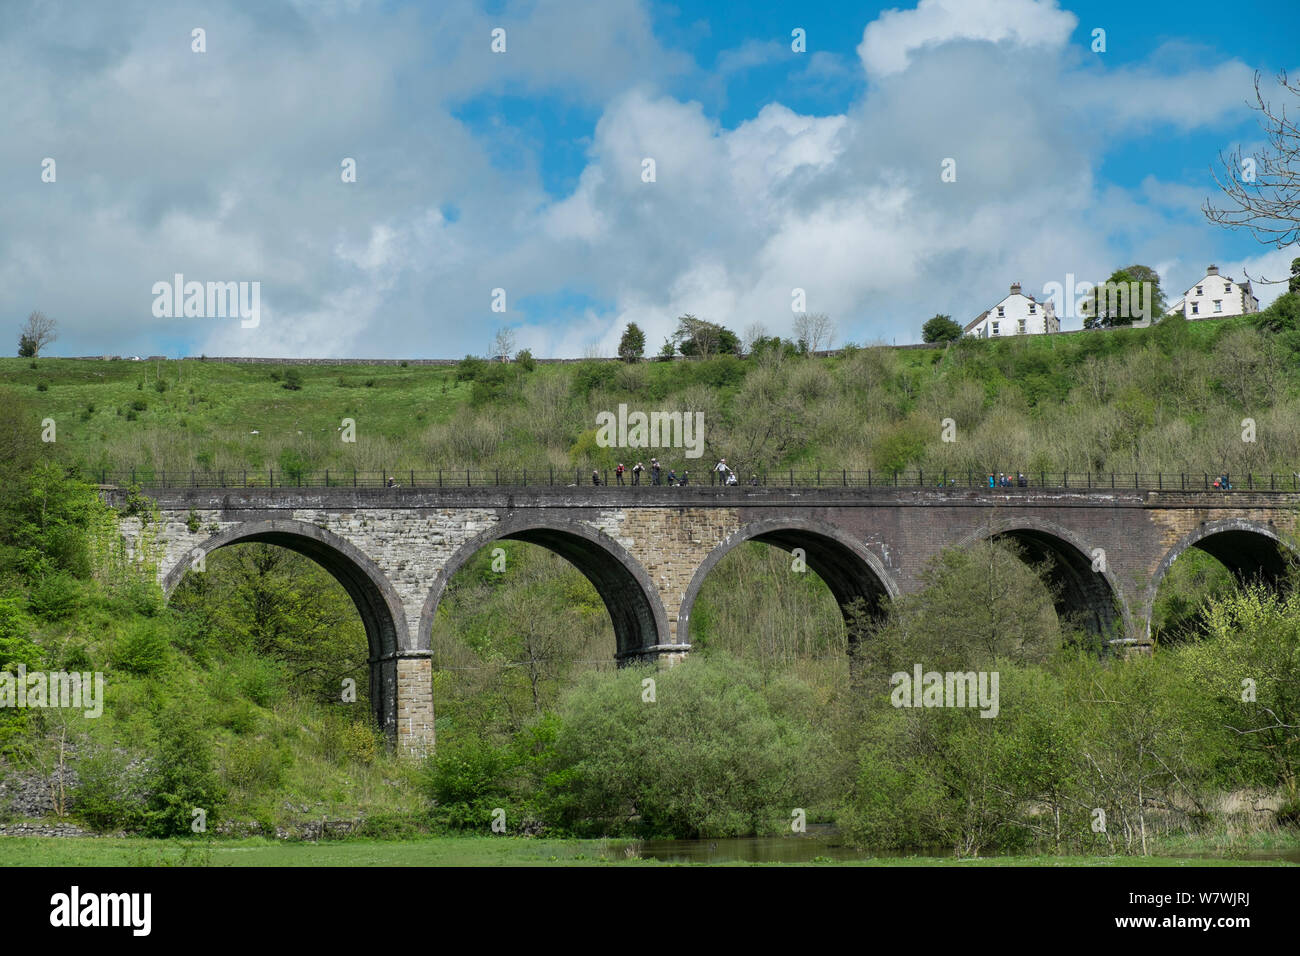 Walkers and cyclists on the Monsal Viaduct, known as the Monsal Trail, Peak District National Park, Derbyshire, England. Stock Photo